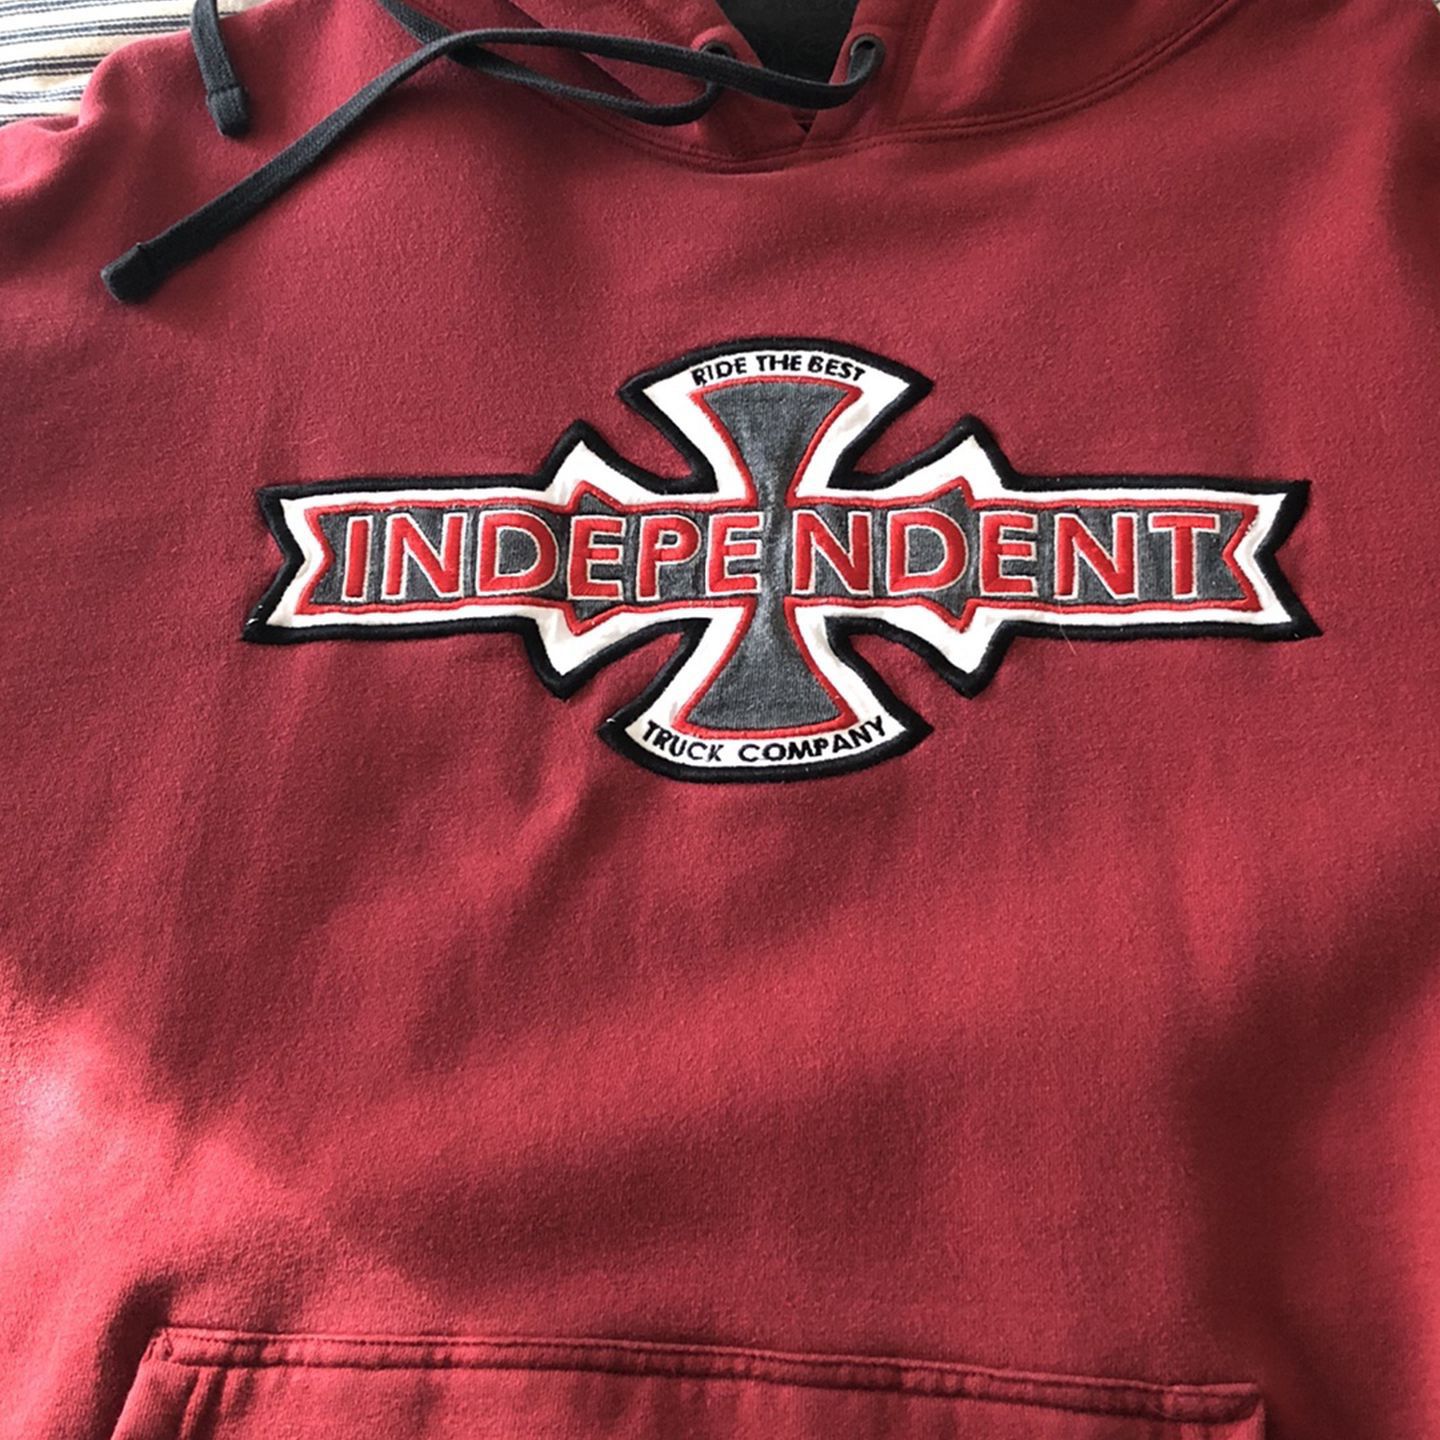 Independent Trucks Hooded Sweatshirt And Other Independent Trucks Accessories